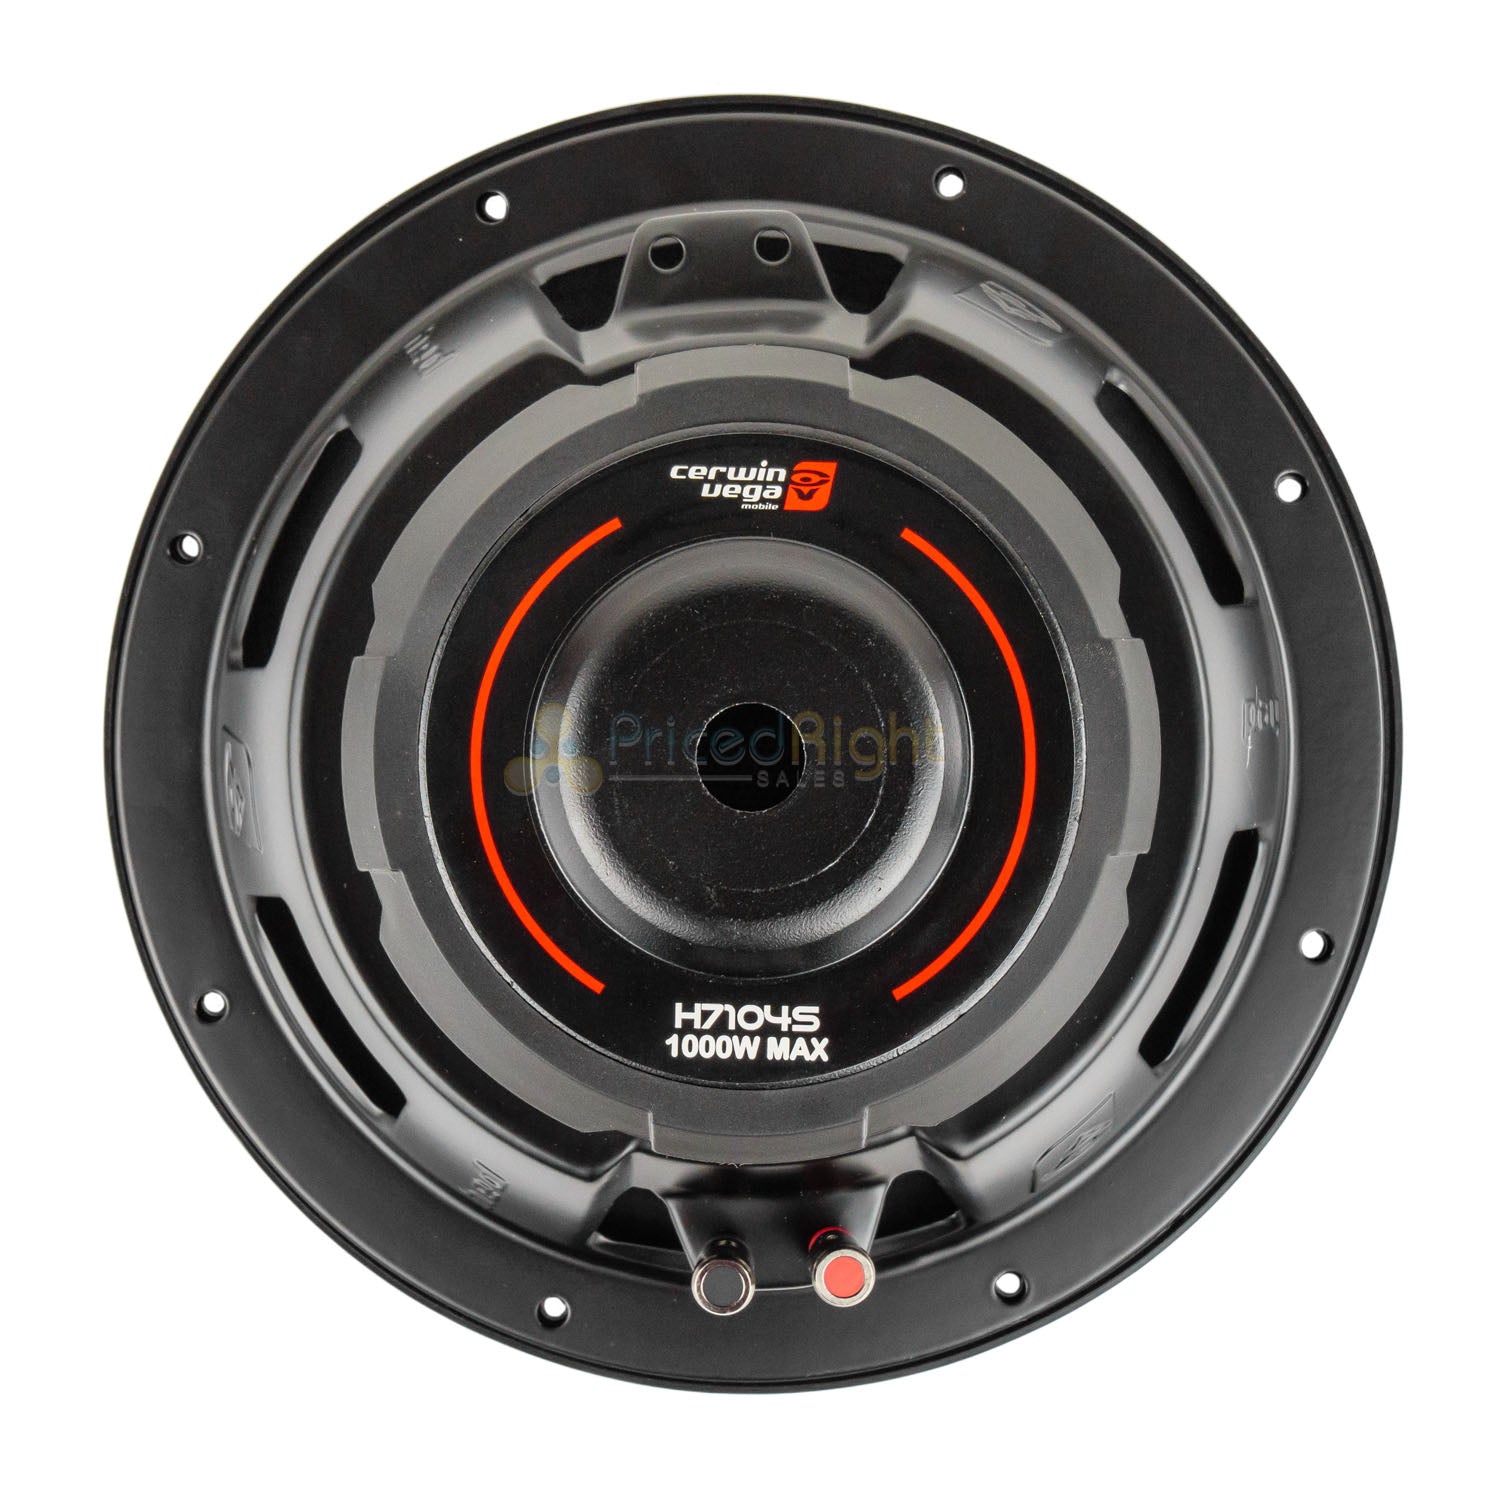 Cerwin Vega 10" Subwoofer 4 Ohm 1000W Max Power SVC HED Series CER-H7104S